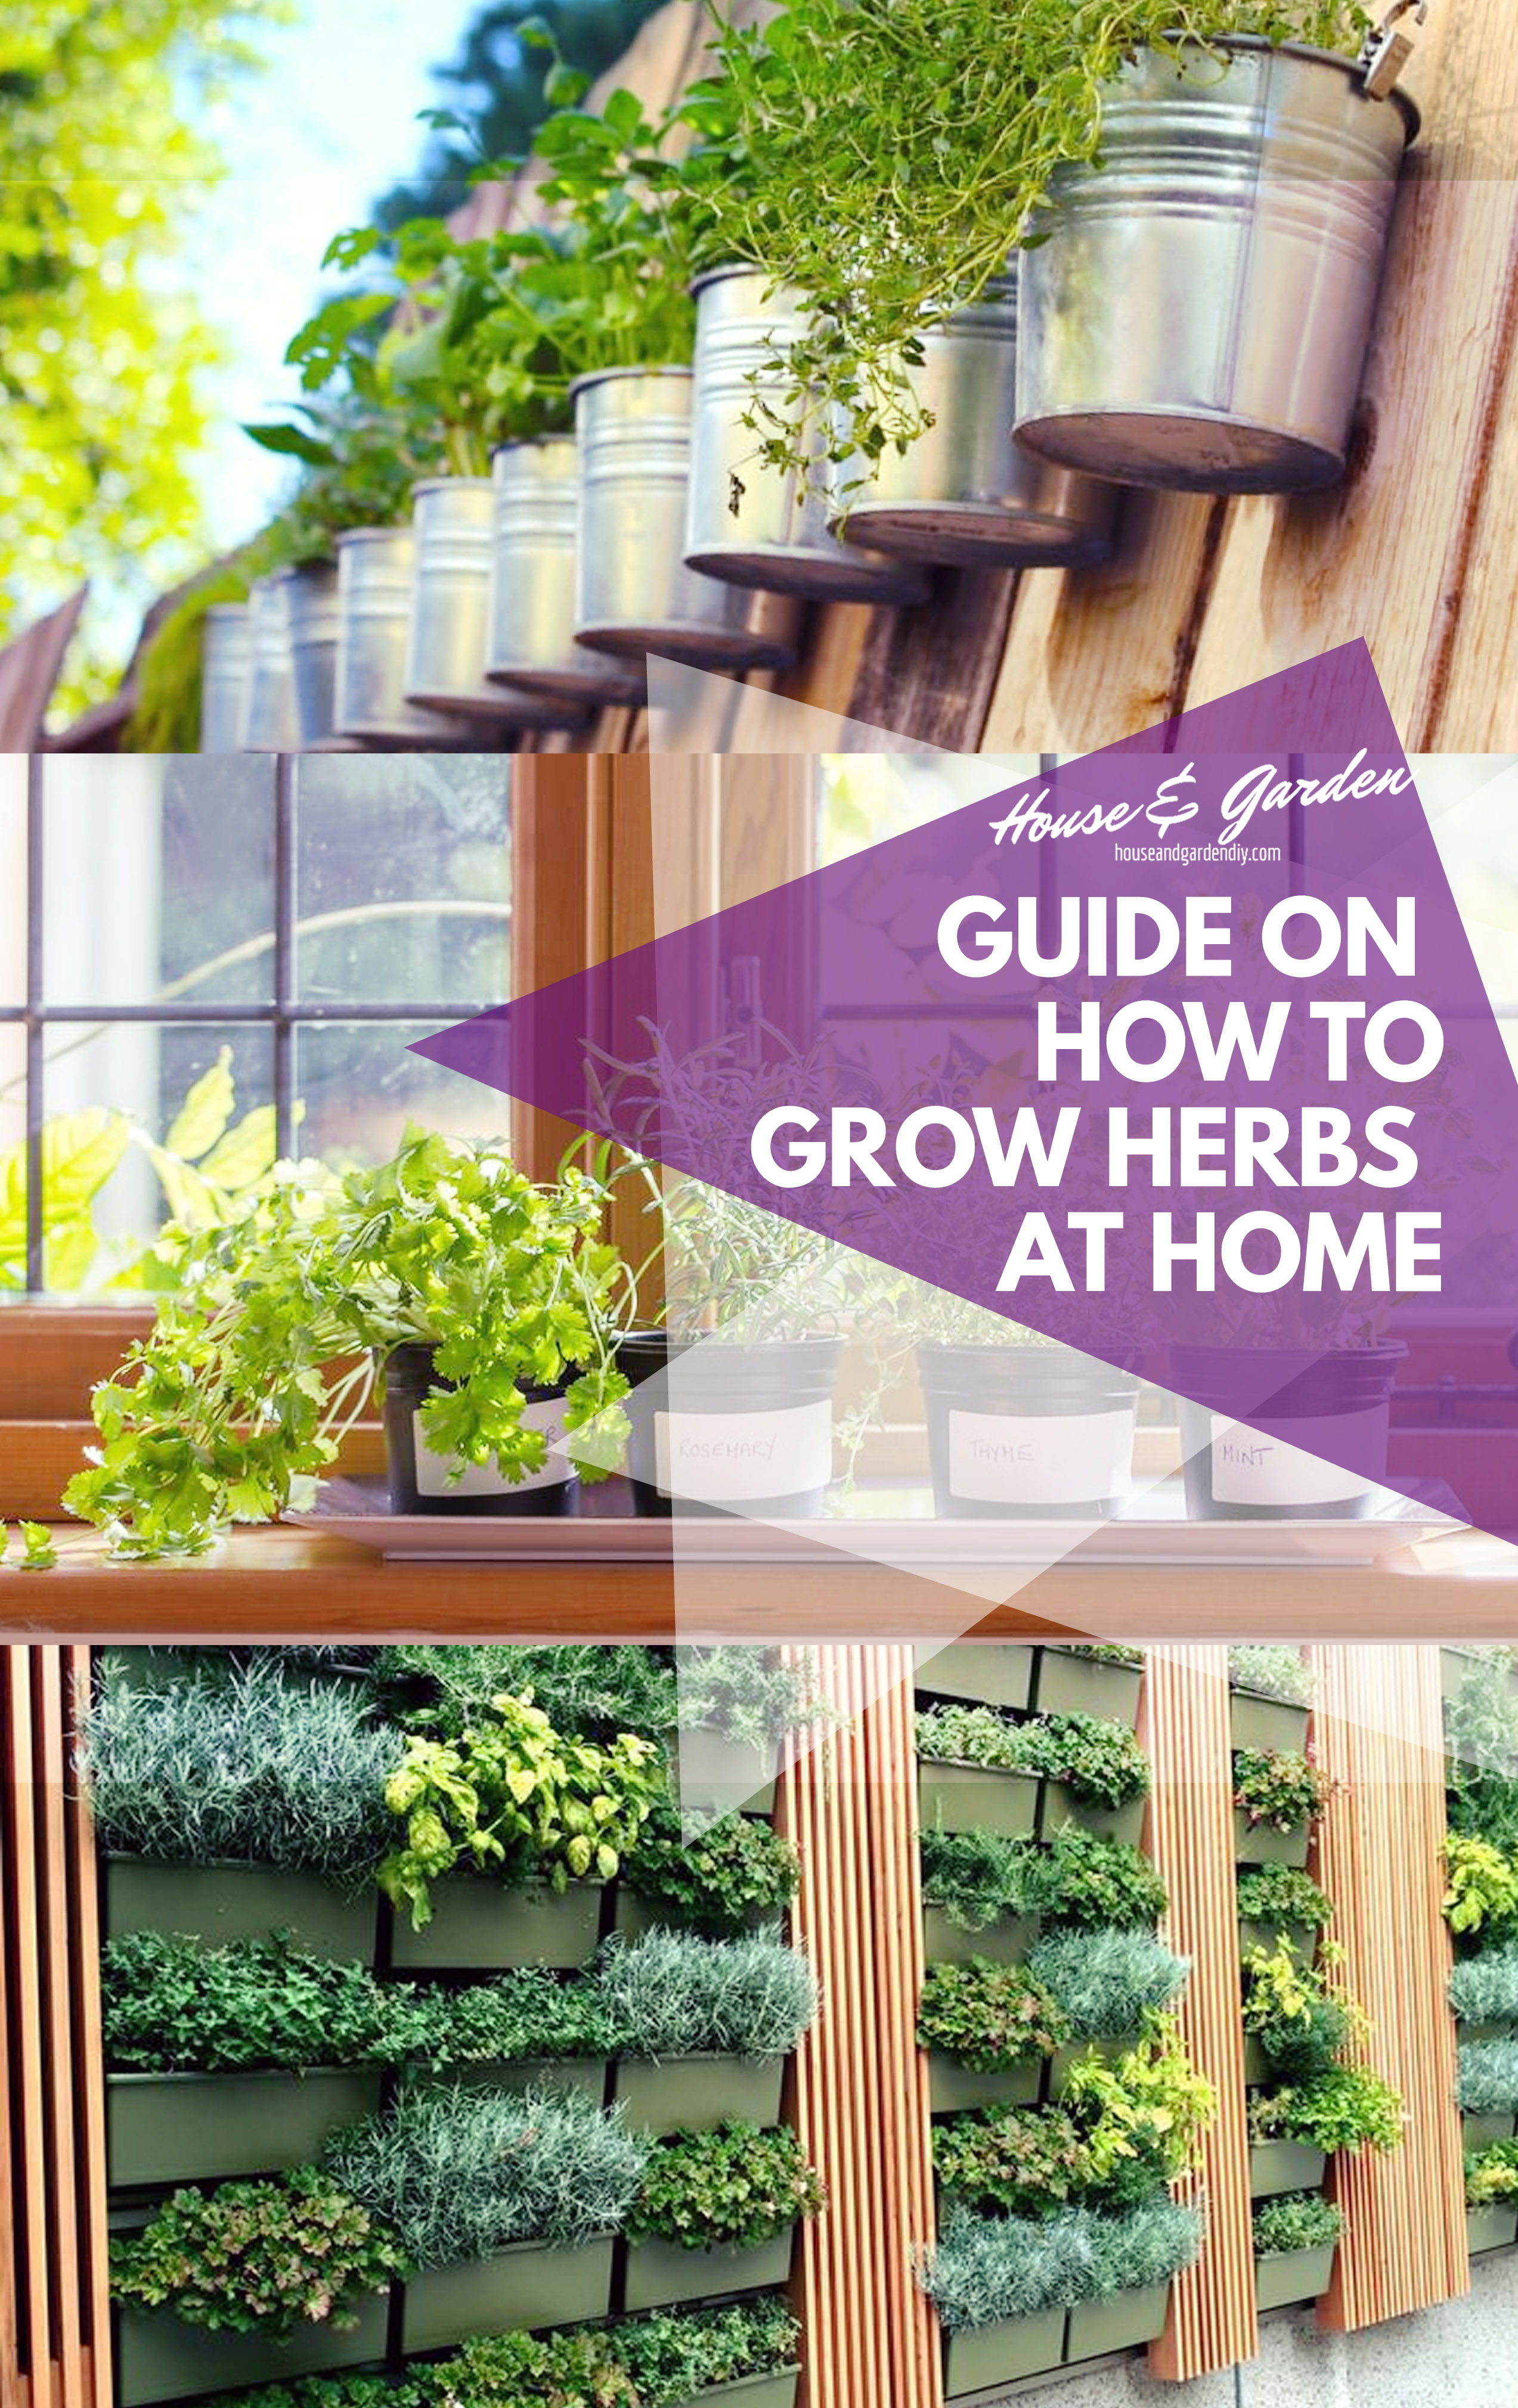 Guide on How to Grow Herbs at Home 